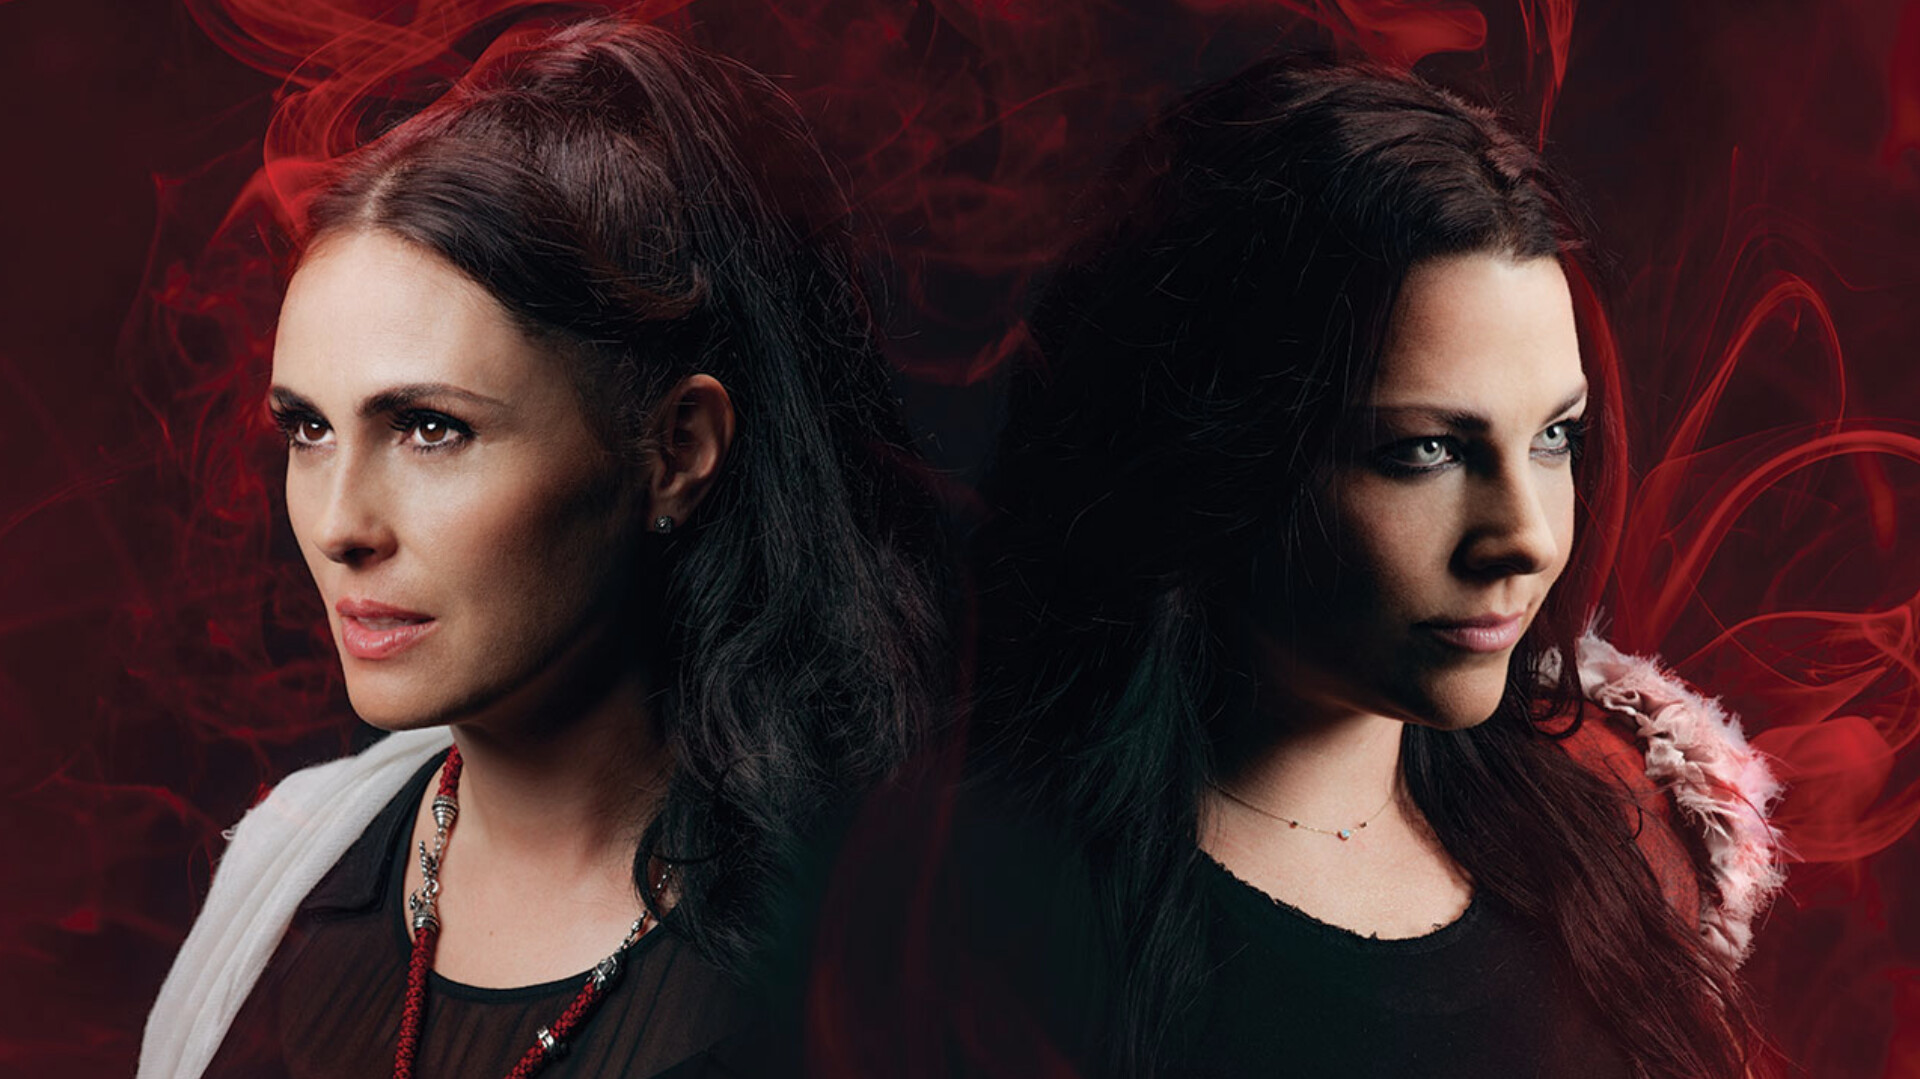 1920x1079
Keywords: worlds collide tour;amy lee;sharon den adel;photoshoot;sesion;red